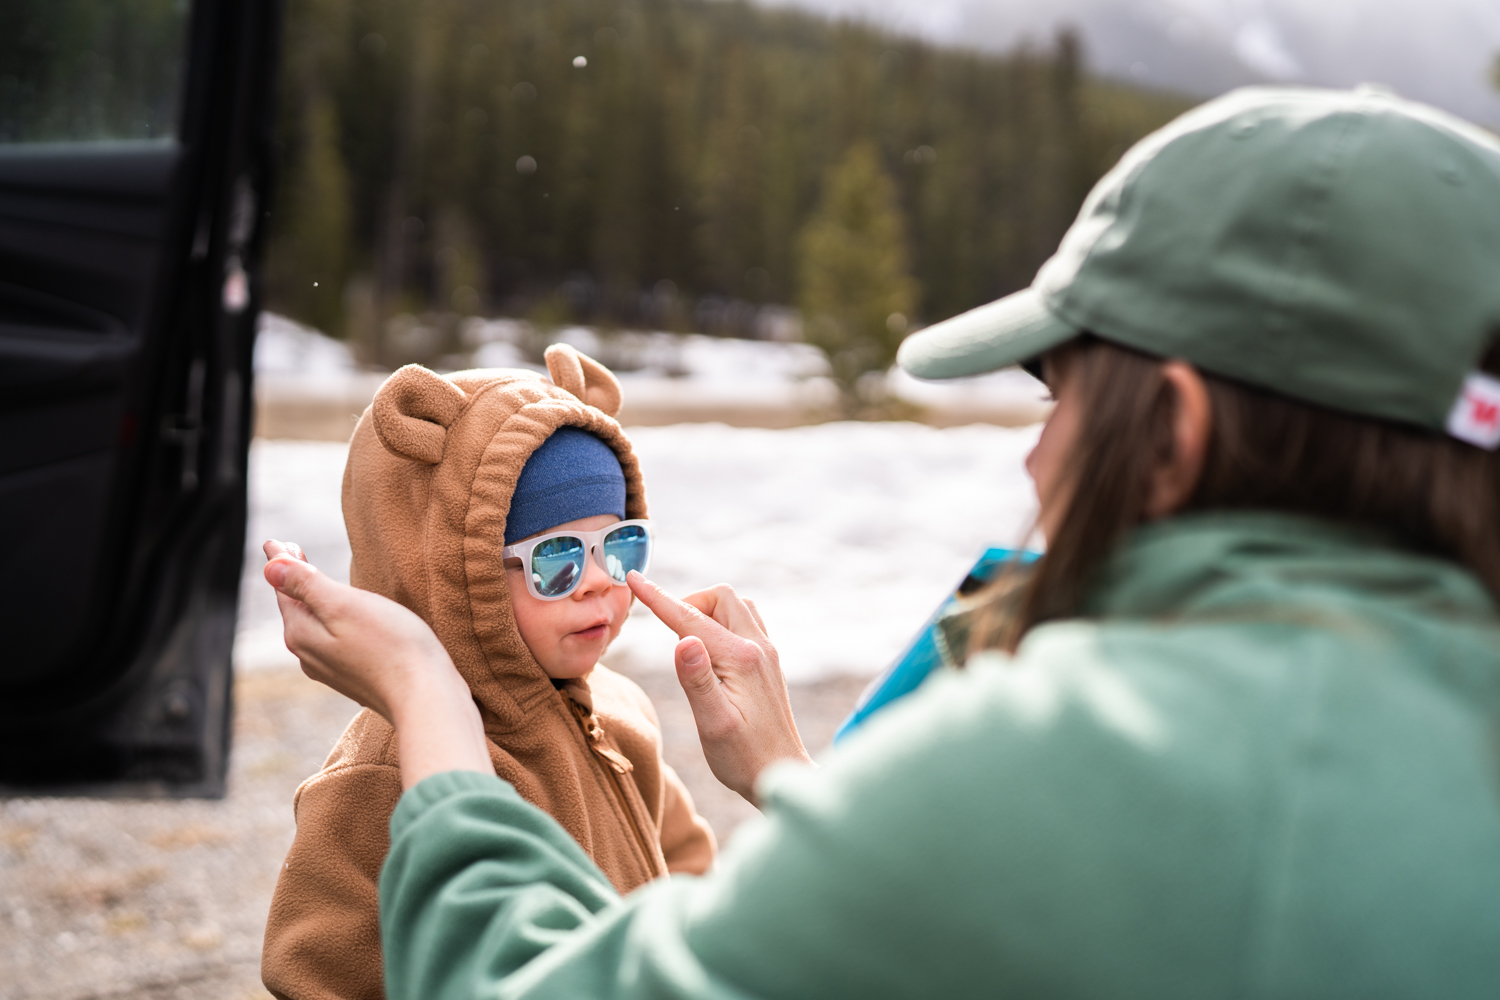 mom in green fleece and green hat applies sunscreen to toddlers face while she wears a hat, sunglasses, and a brown bear fleece before heading off on a hike